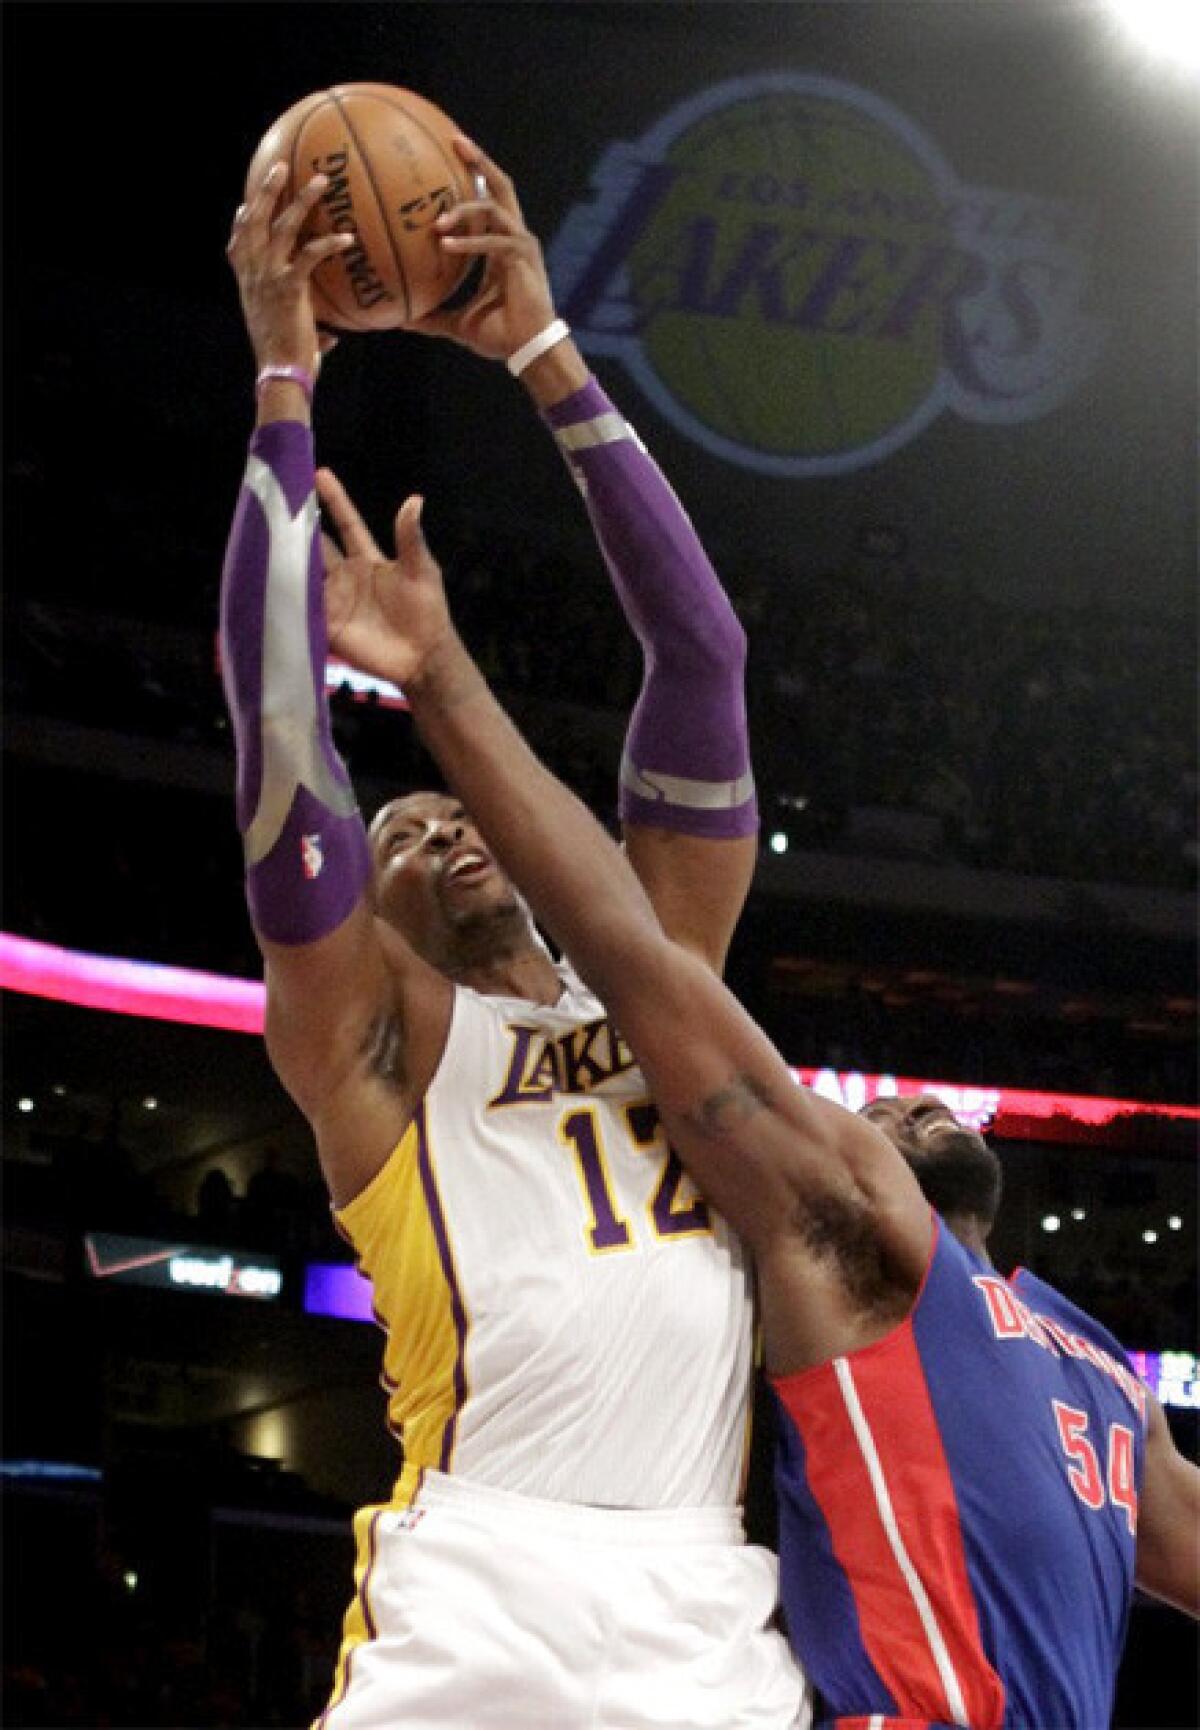 Dwight Howard skies over Detroit's Jason Maxiell for a rebound during the recent Lakers-Pistons game at Staples Center.